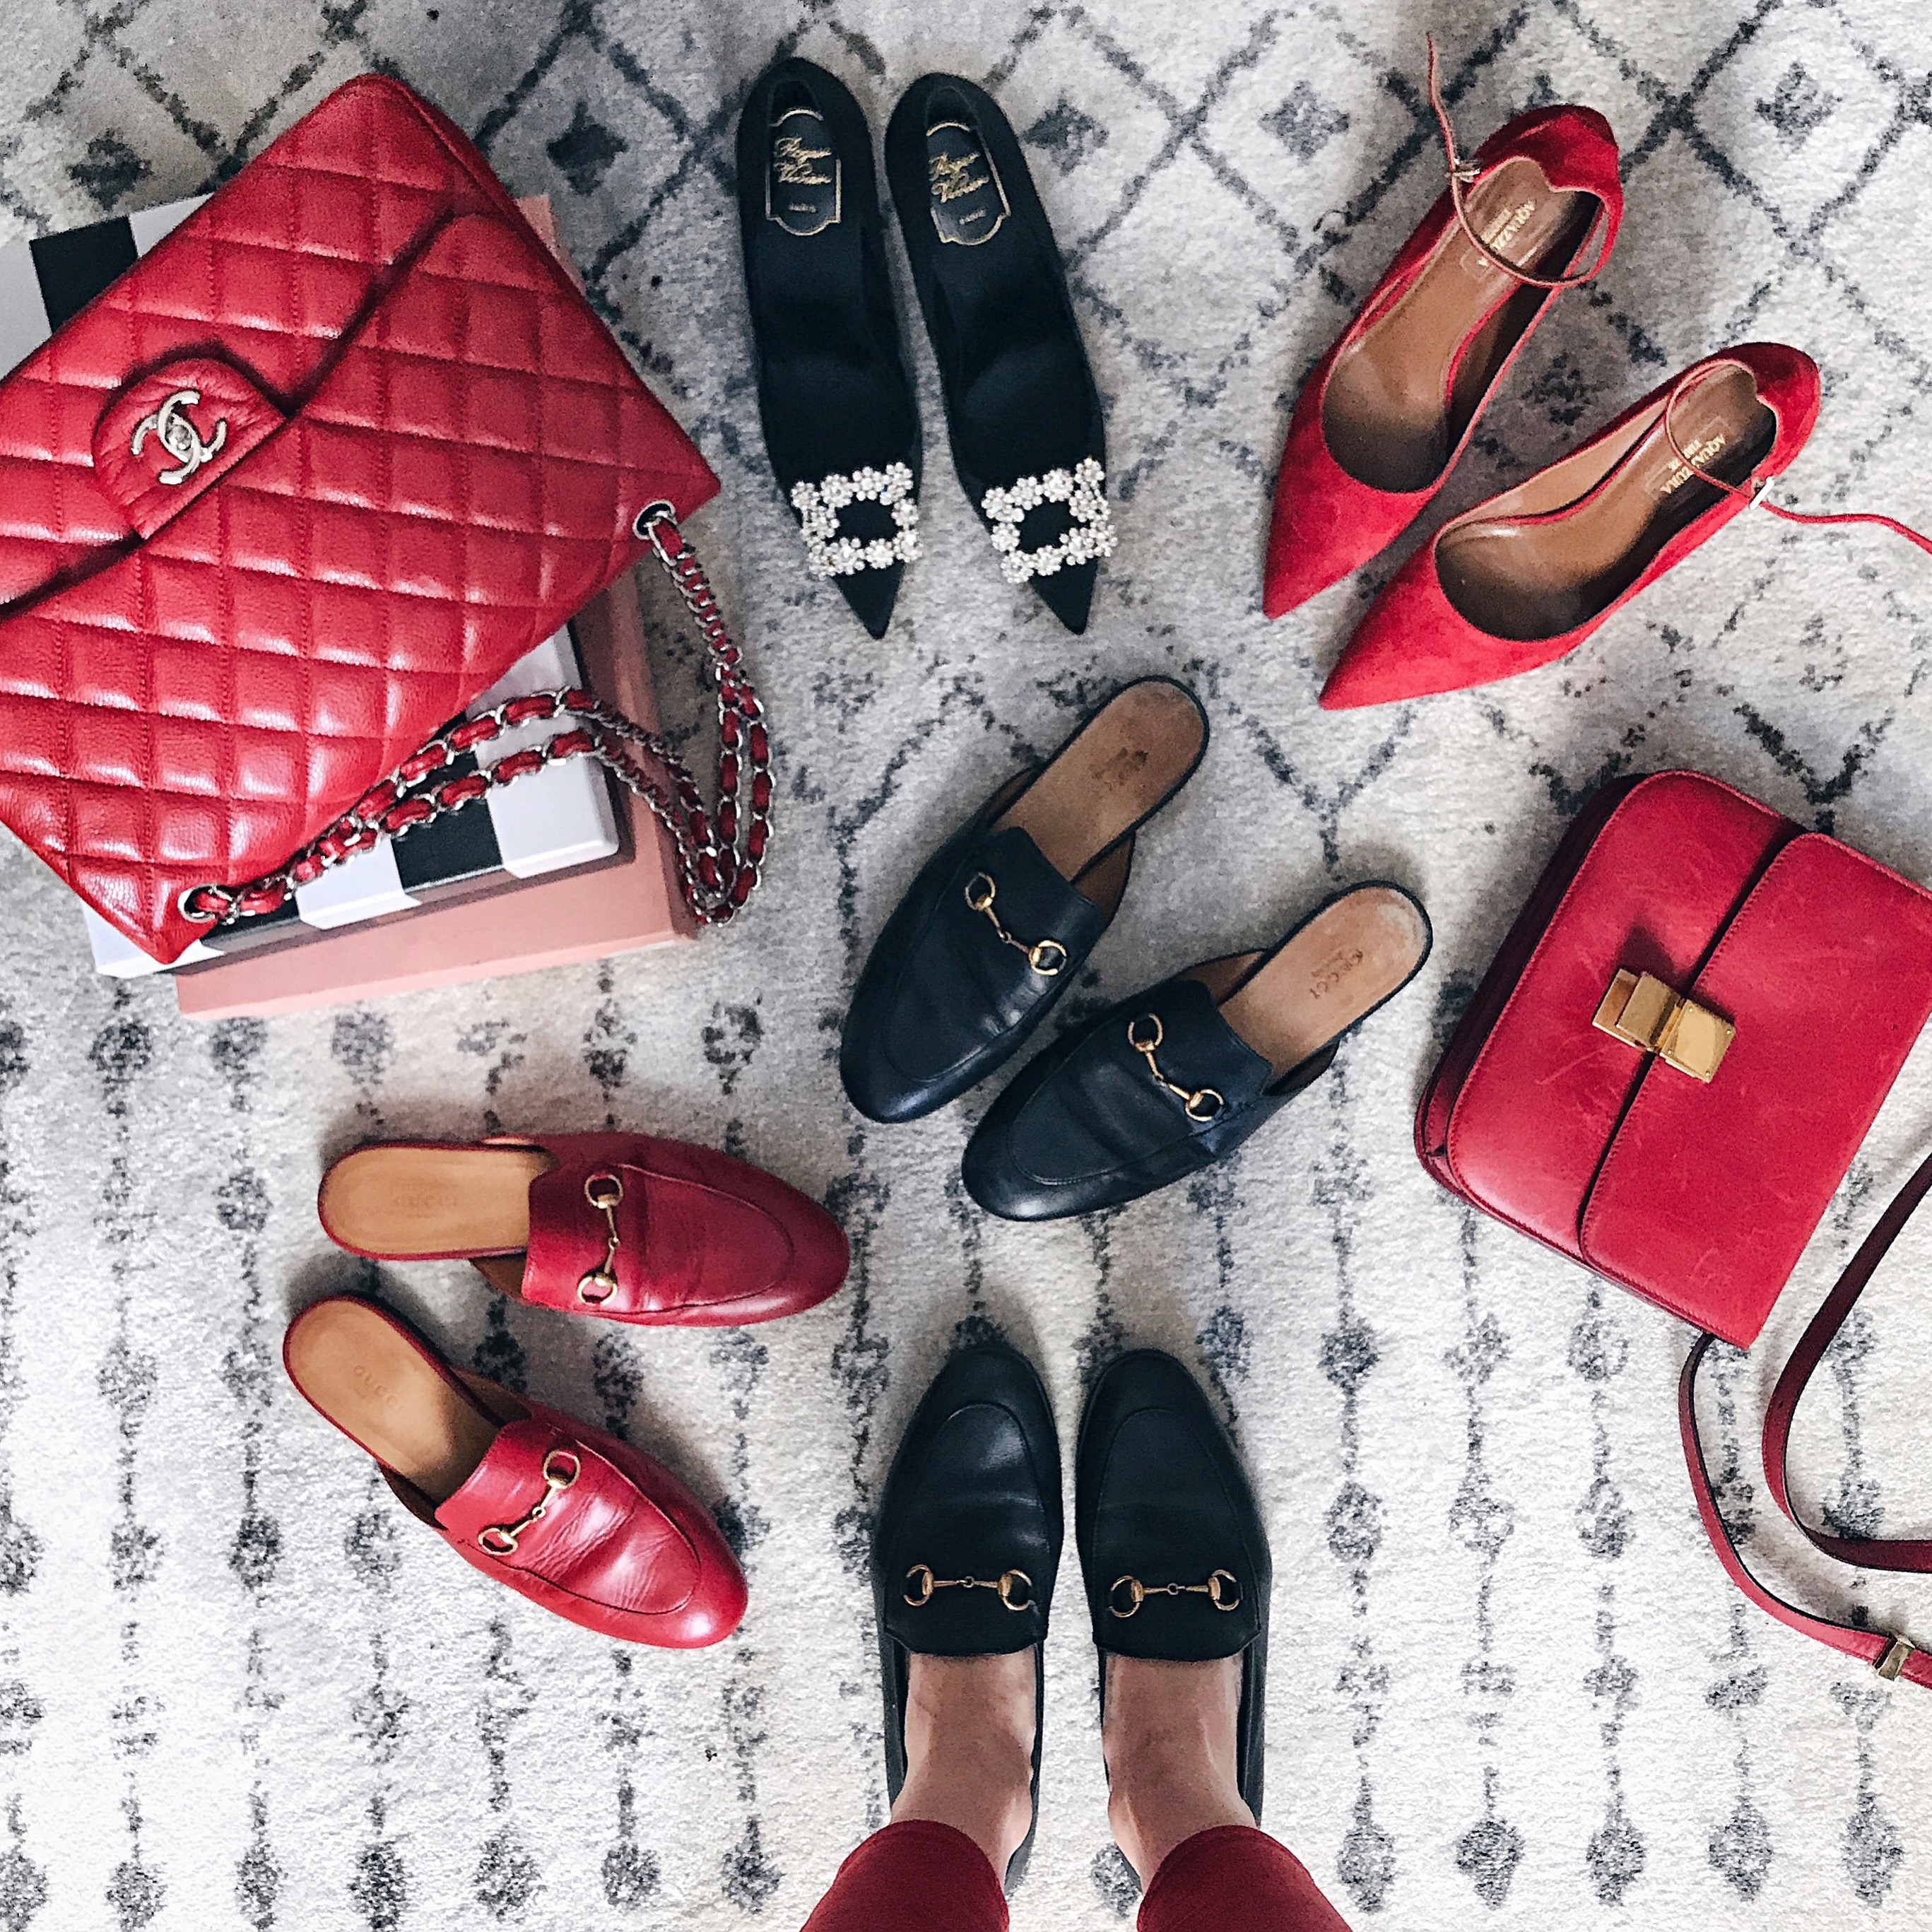 Gucci Princetown Loafers, Aquazzura Flats, Red and Black Details, Helena of Brooklyn Blonde